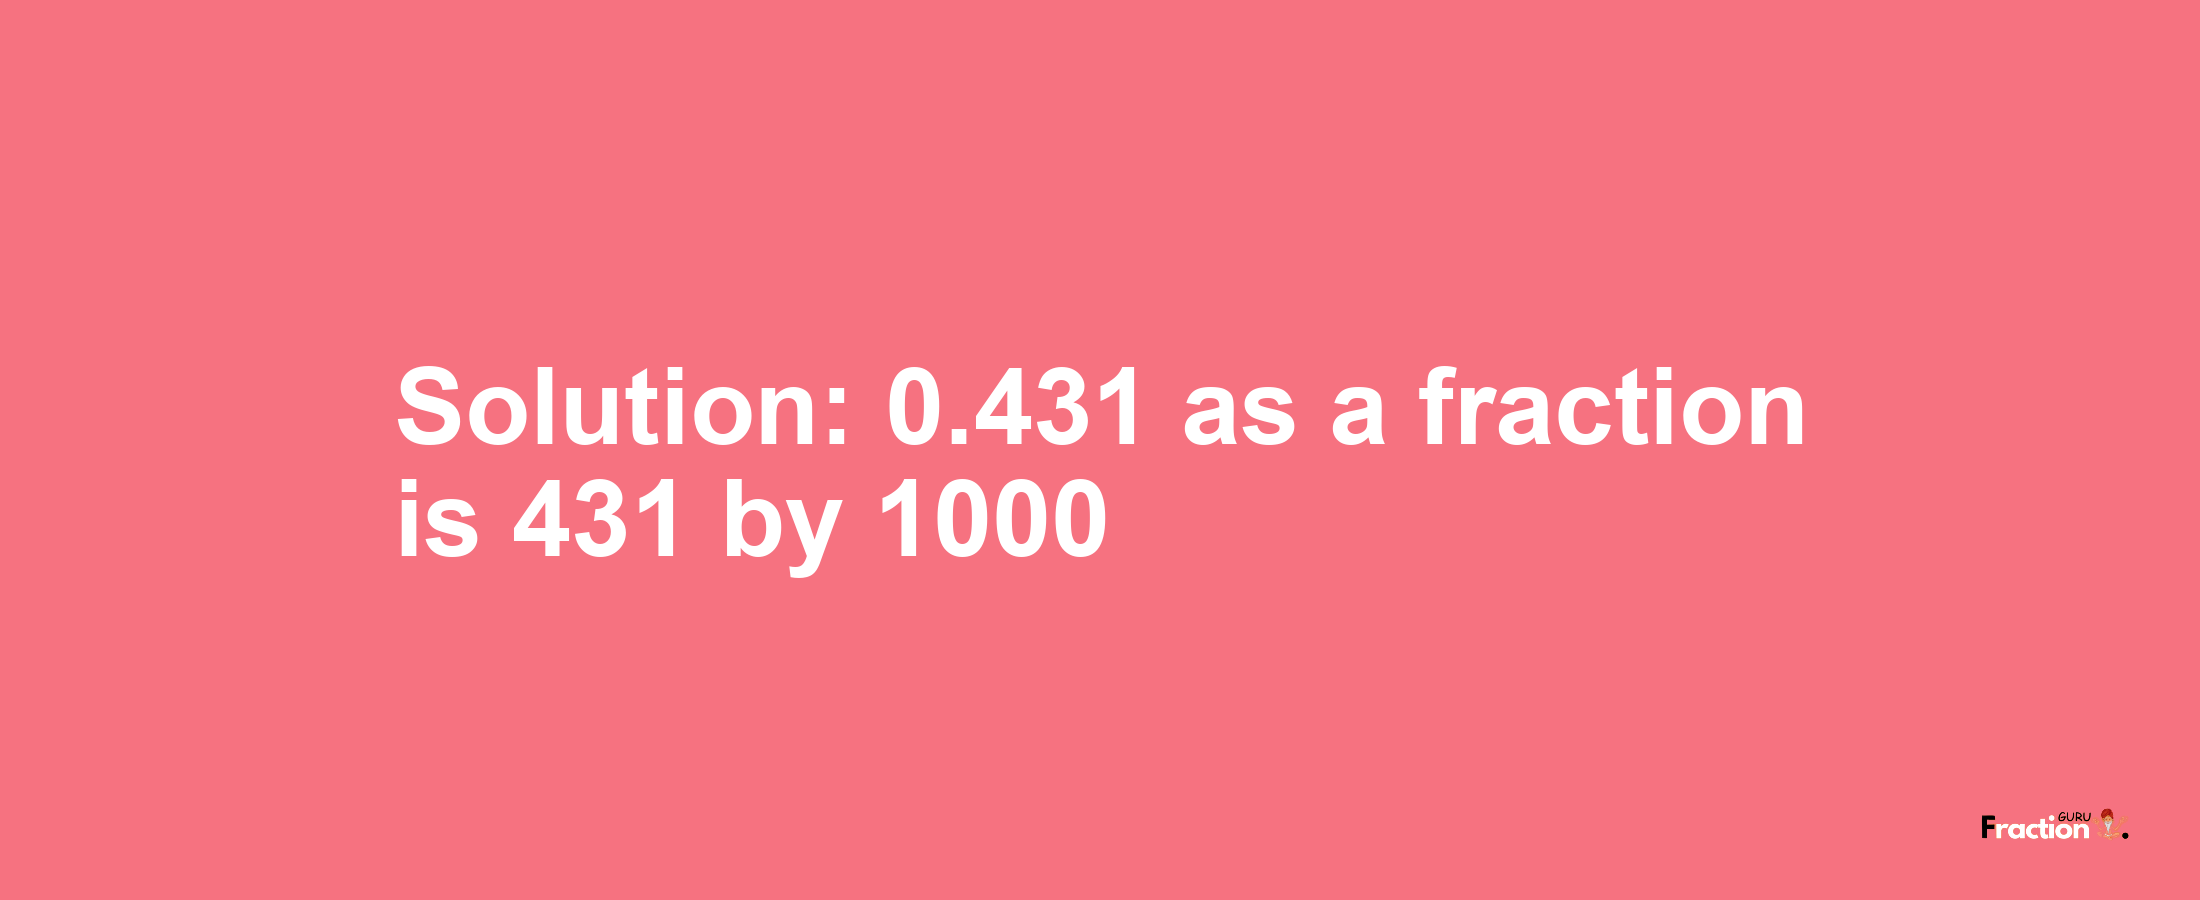 Solution:0.431 as a fraction is 431/1000